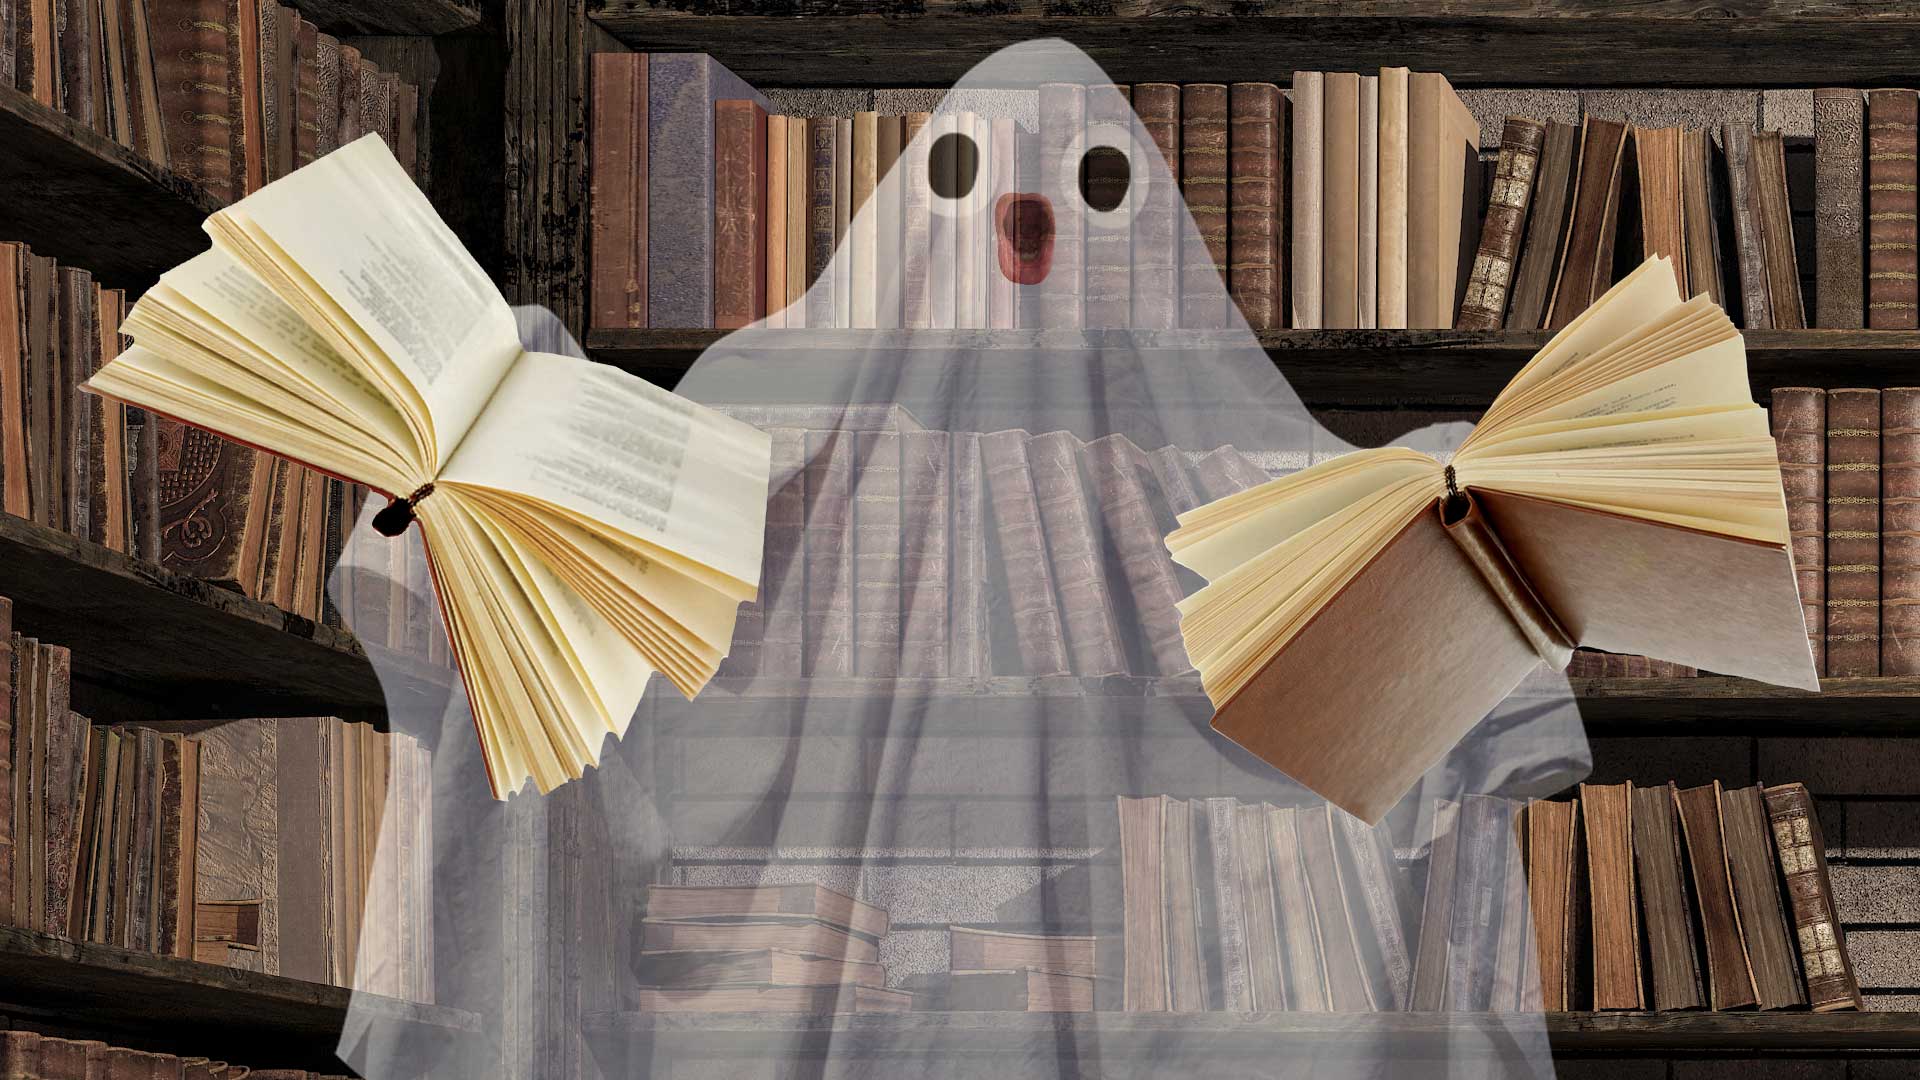 A haunted library